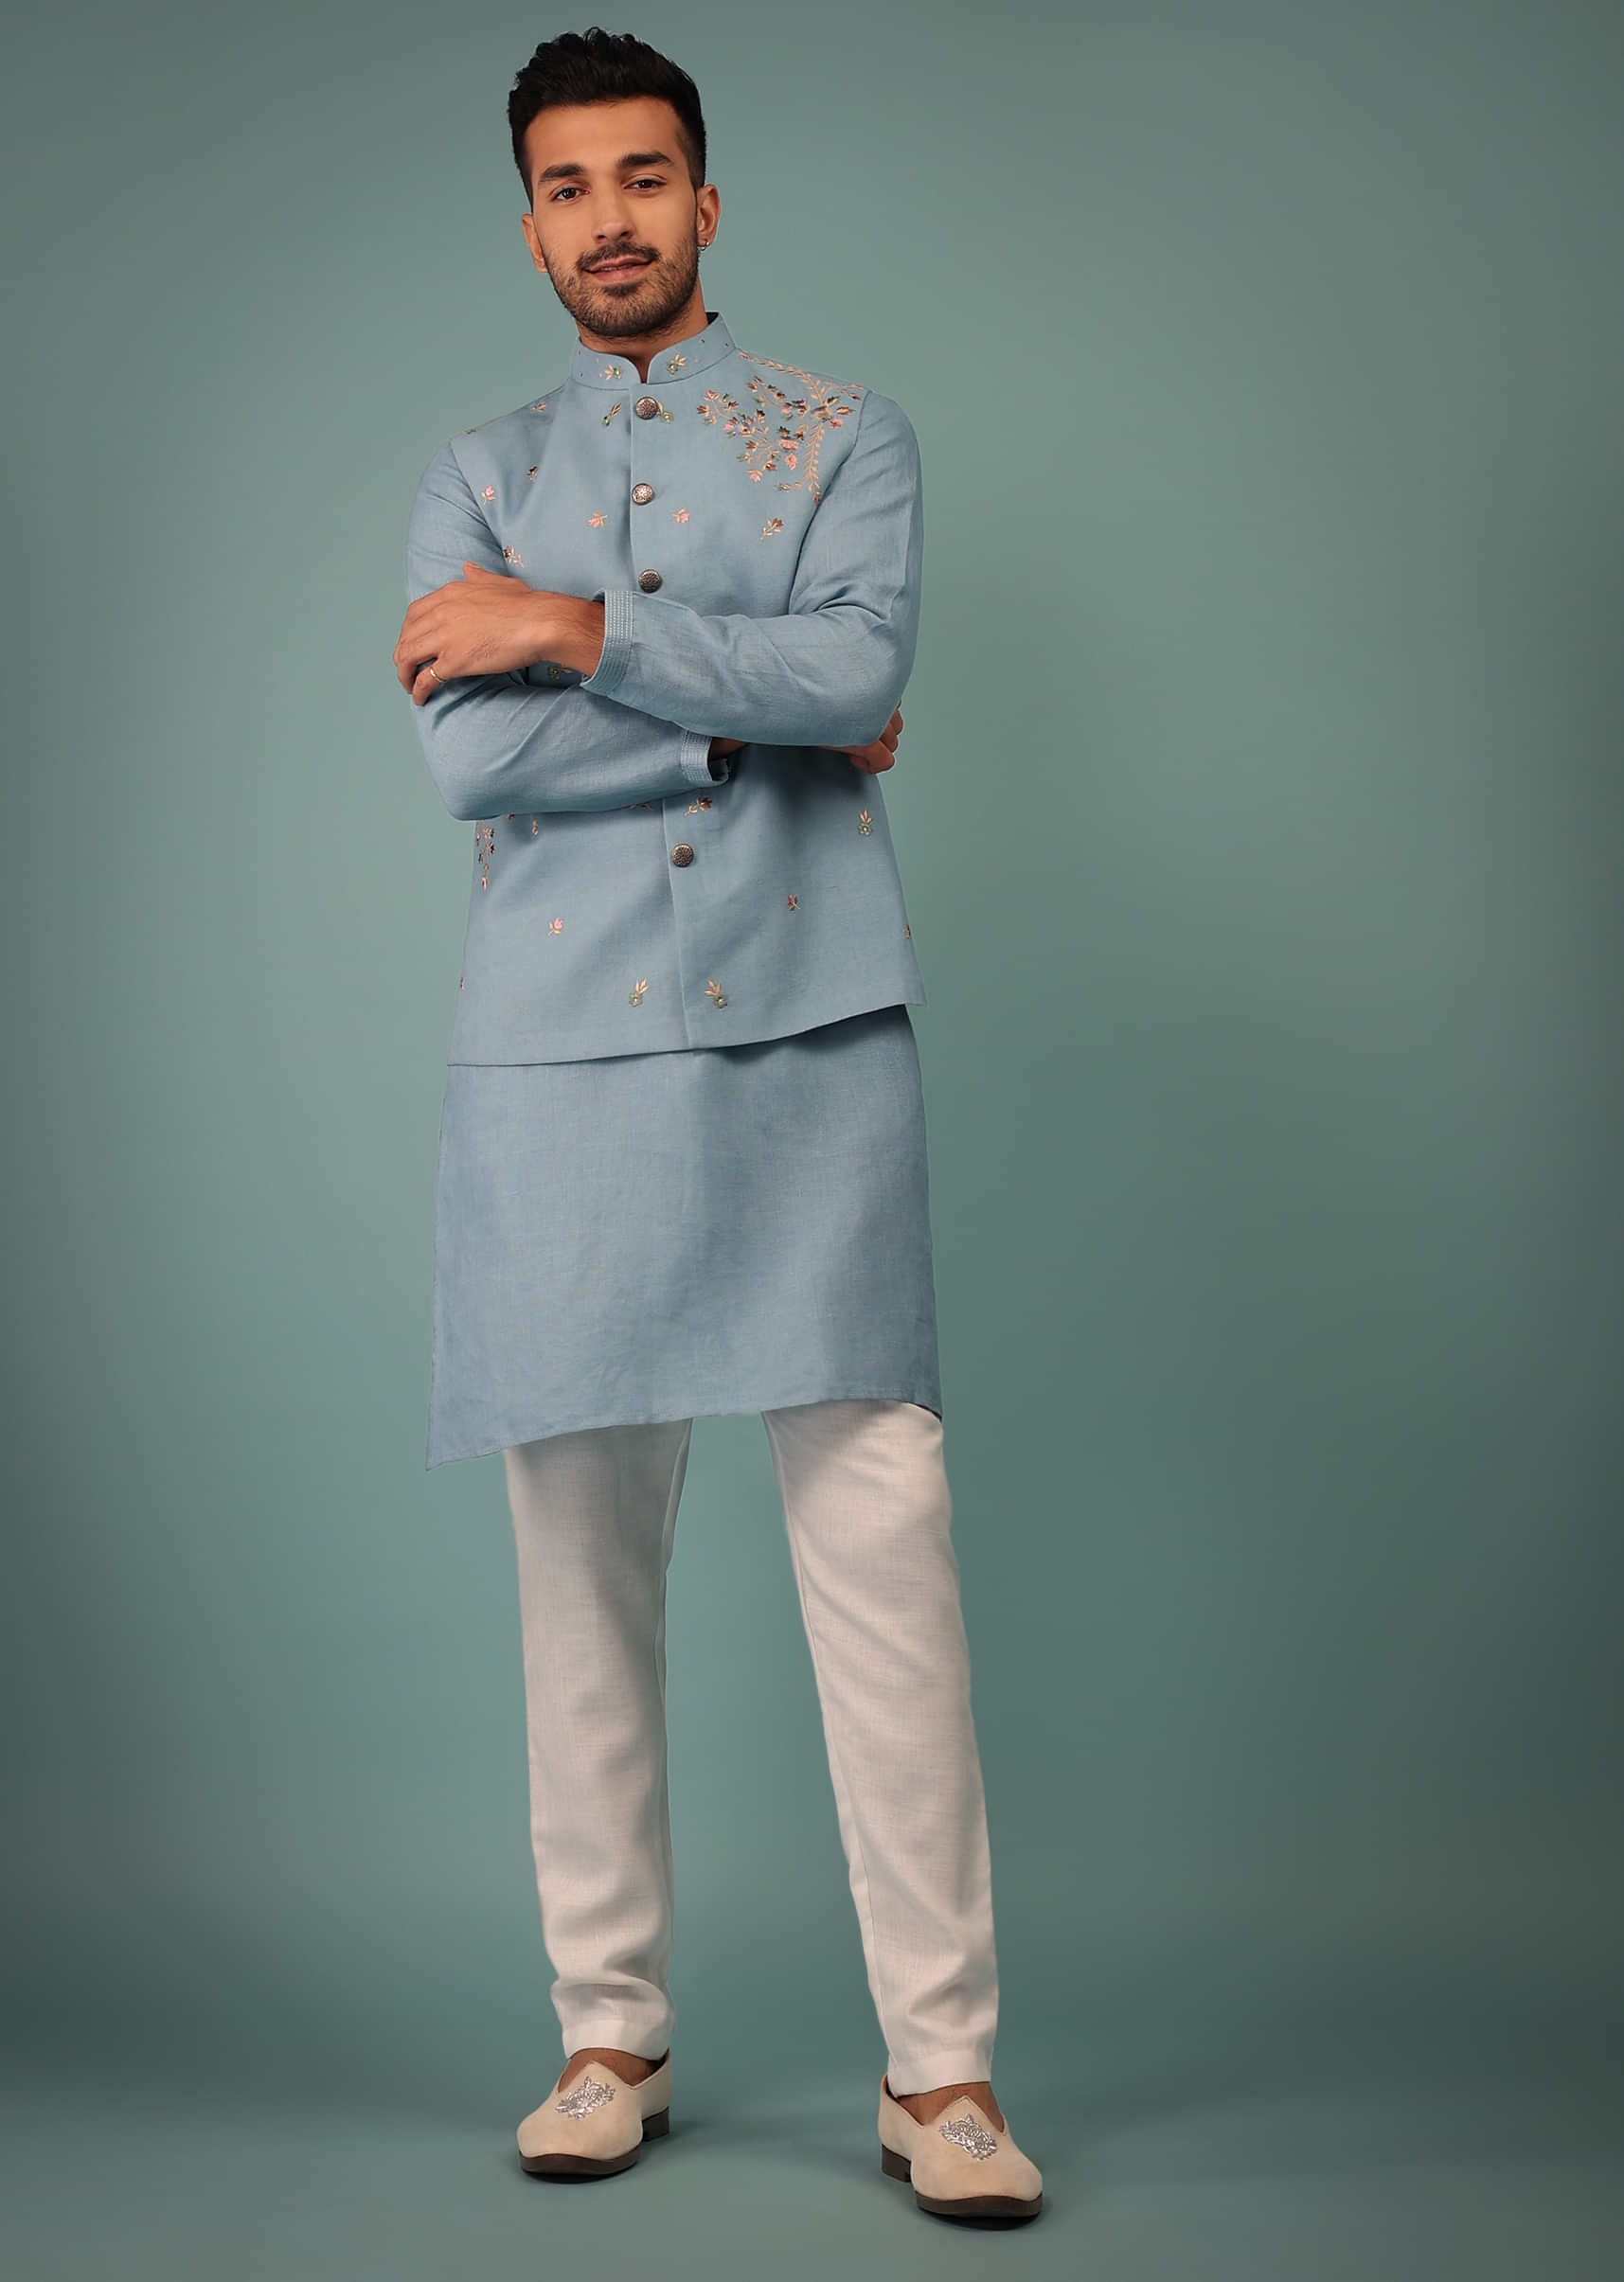 Powder Blue Bandi Jacket Set In Linen With Blooming Floral Embroidery